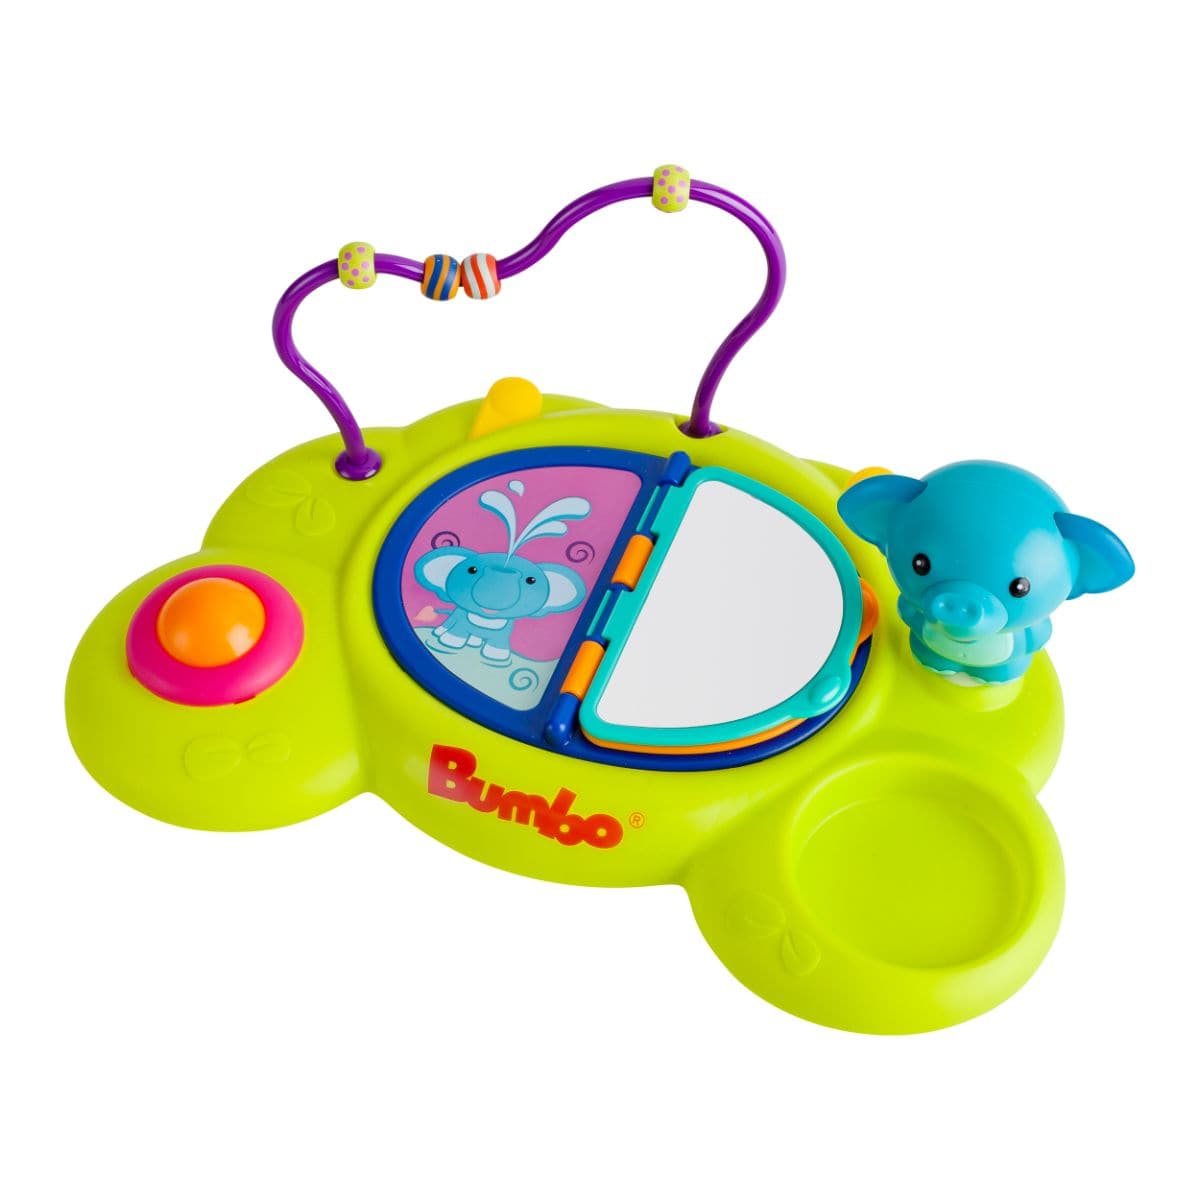 Bumbo Playtop Safari Activity Tray -  | For Your Little One